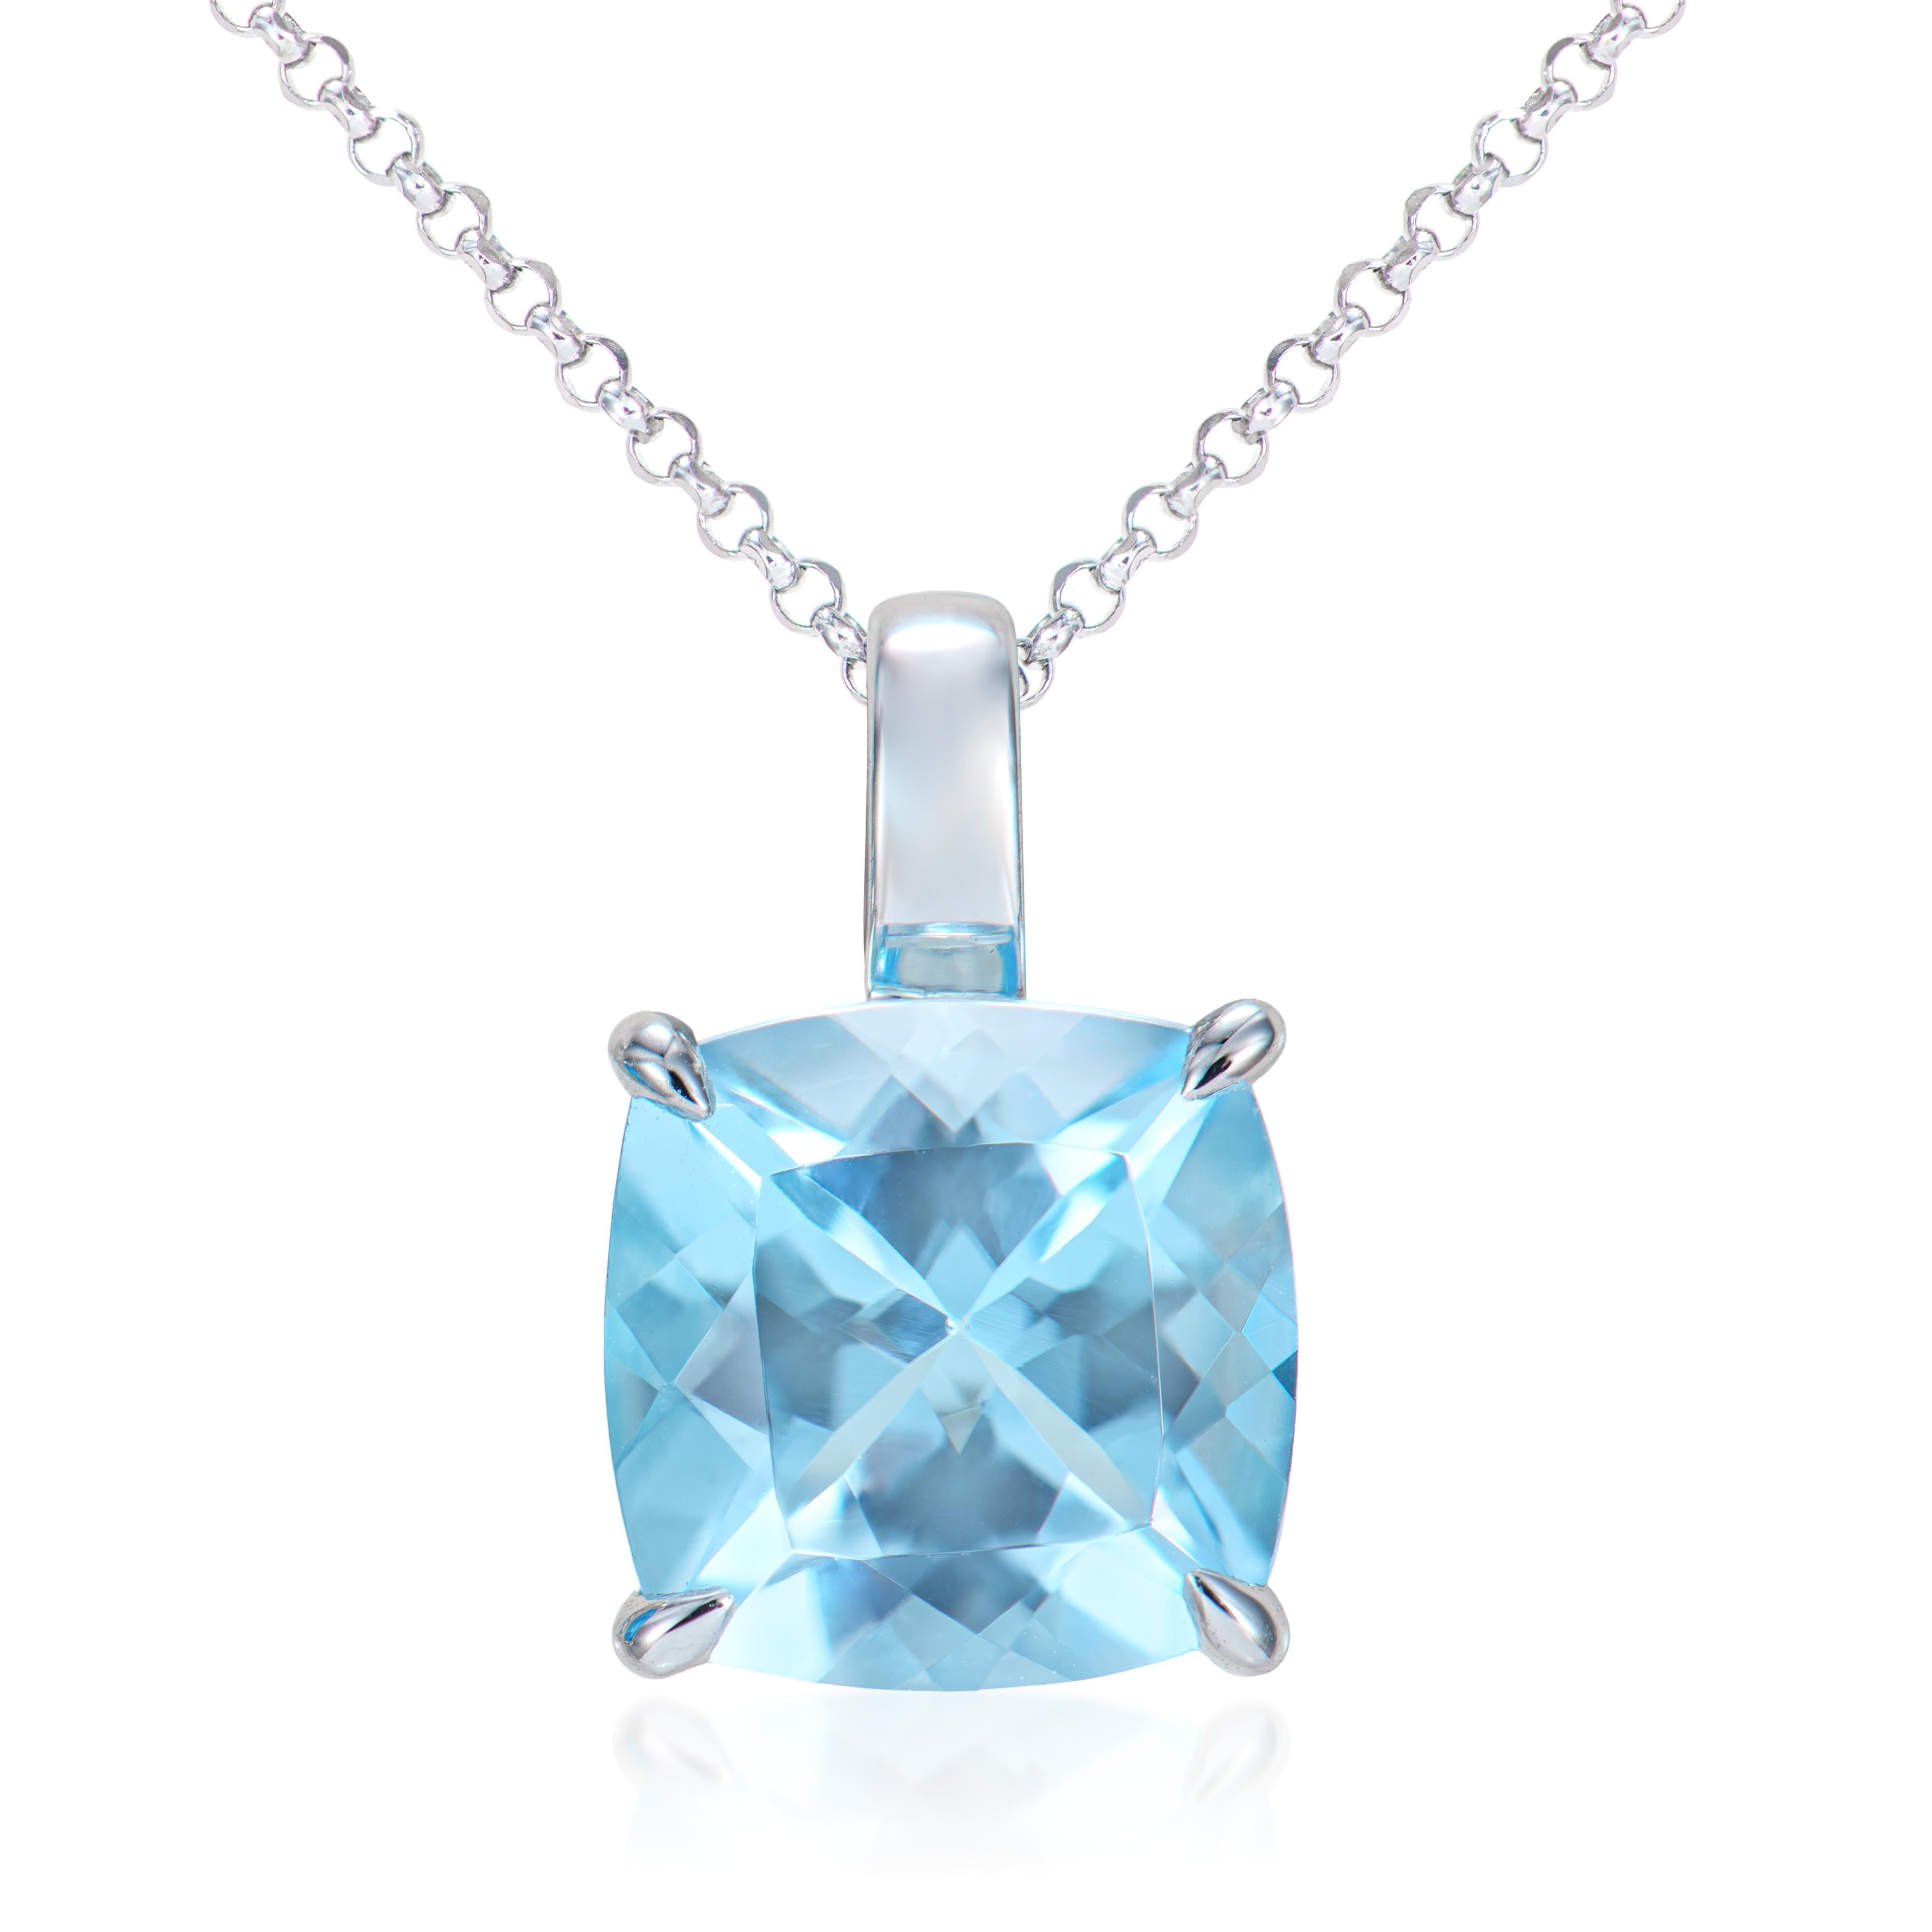 Presented A lovely collection of gems, including Amethyst, Sky Blue Topaz and Swiss Blue Topaz is perfect for people who value quality and want to wear it to any occasion or celebration. The white gold sky blue topaz pendant offer a classic yet